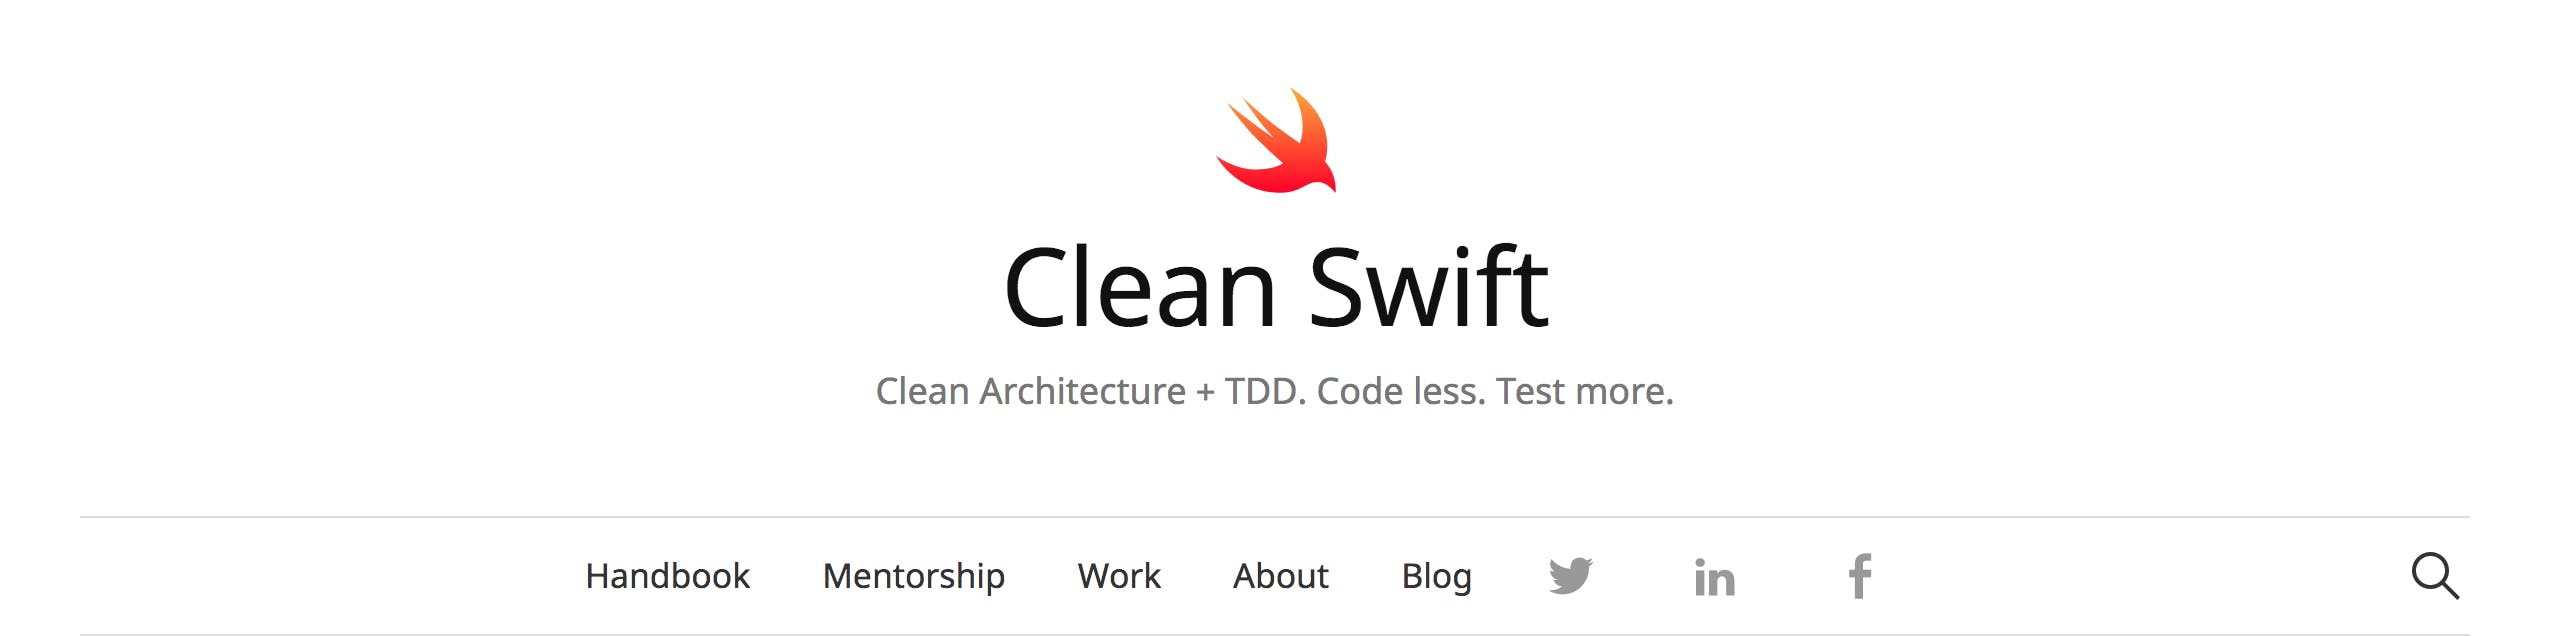 /introducing-clean-swift-architecture-vip-770a639ad7bf feature image